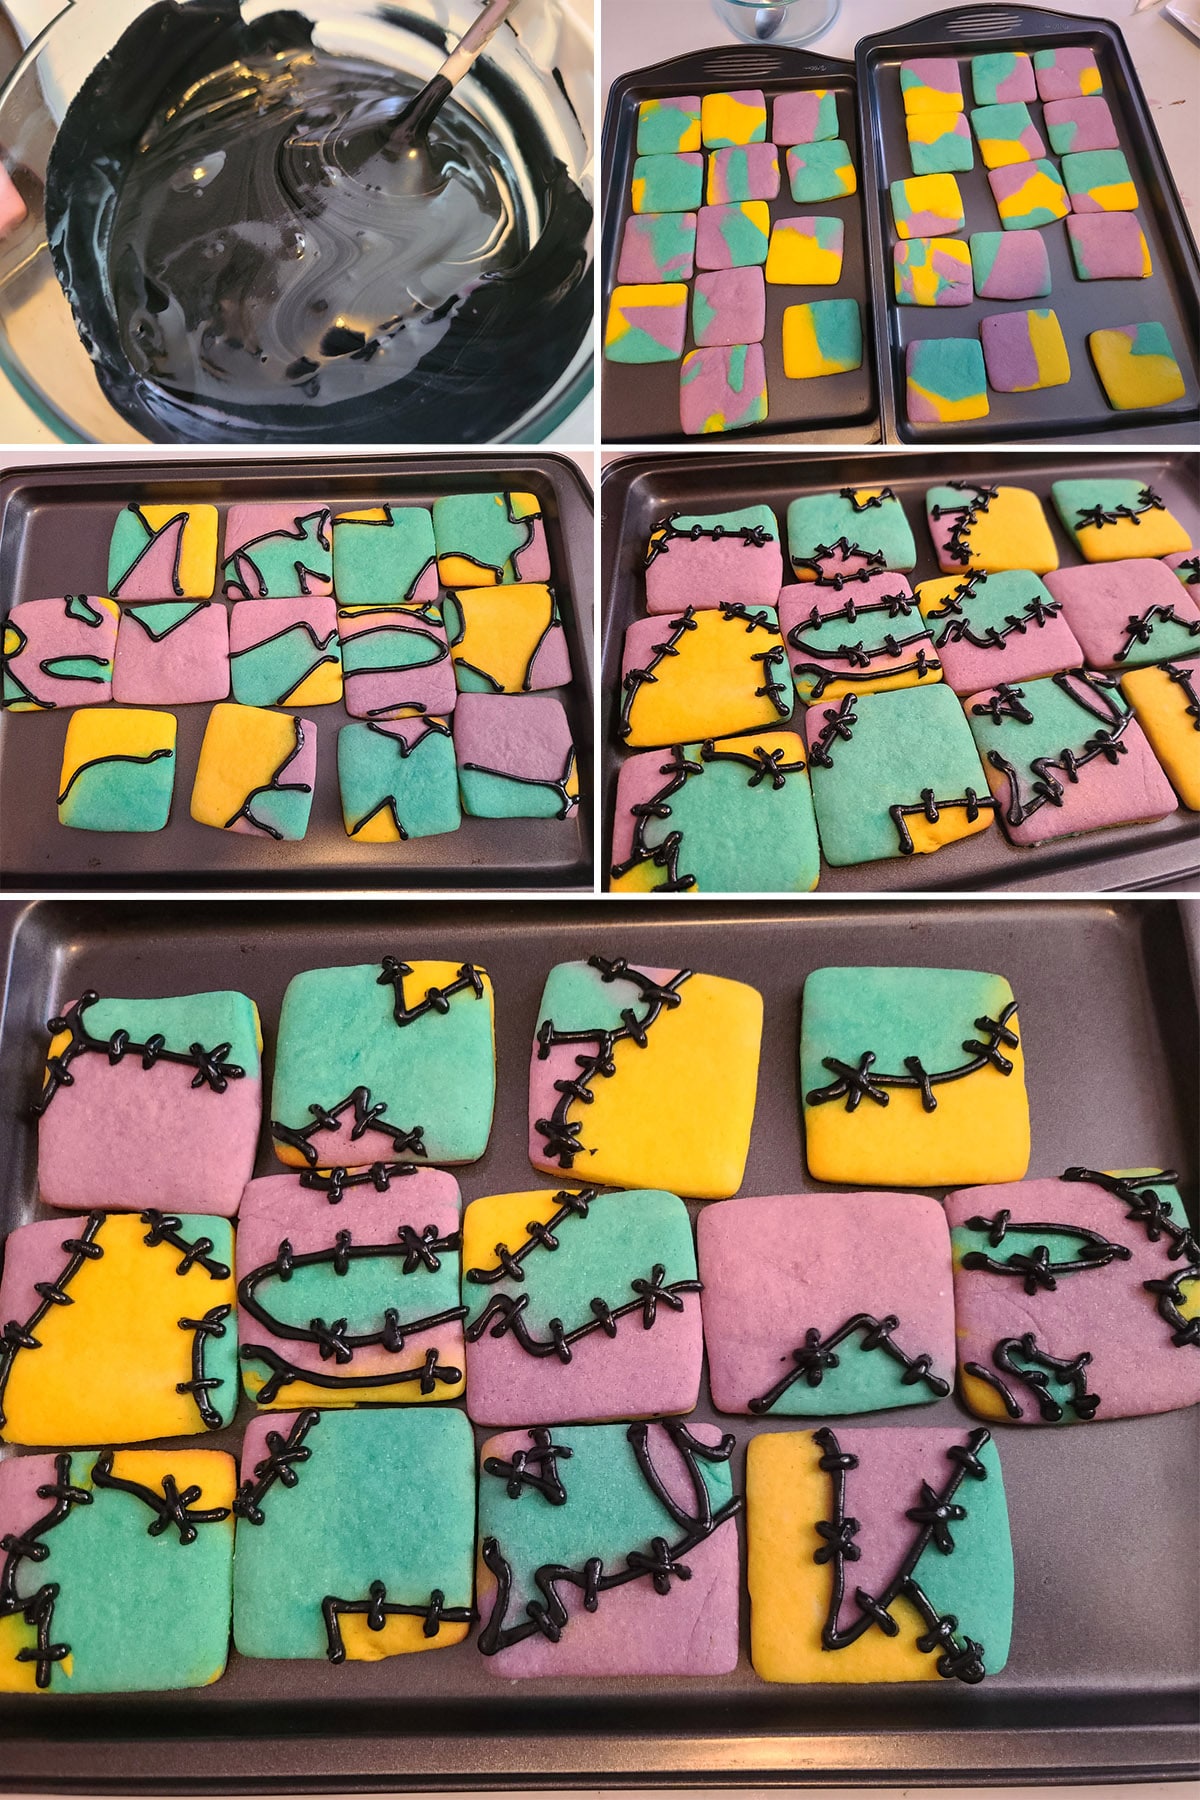 A 5 part image showing the black colour added to the royal icing and used to pipe stitches on the patchwork cookies.